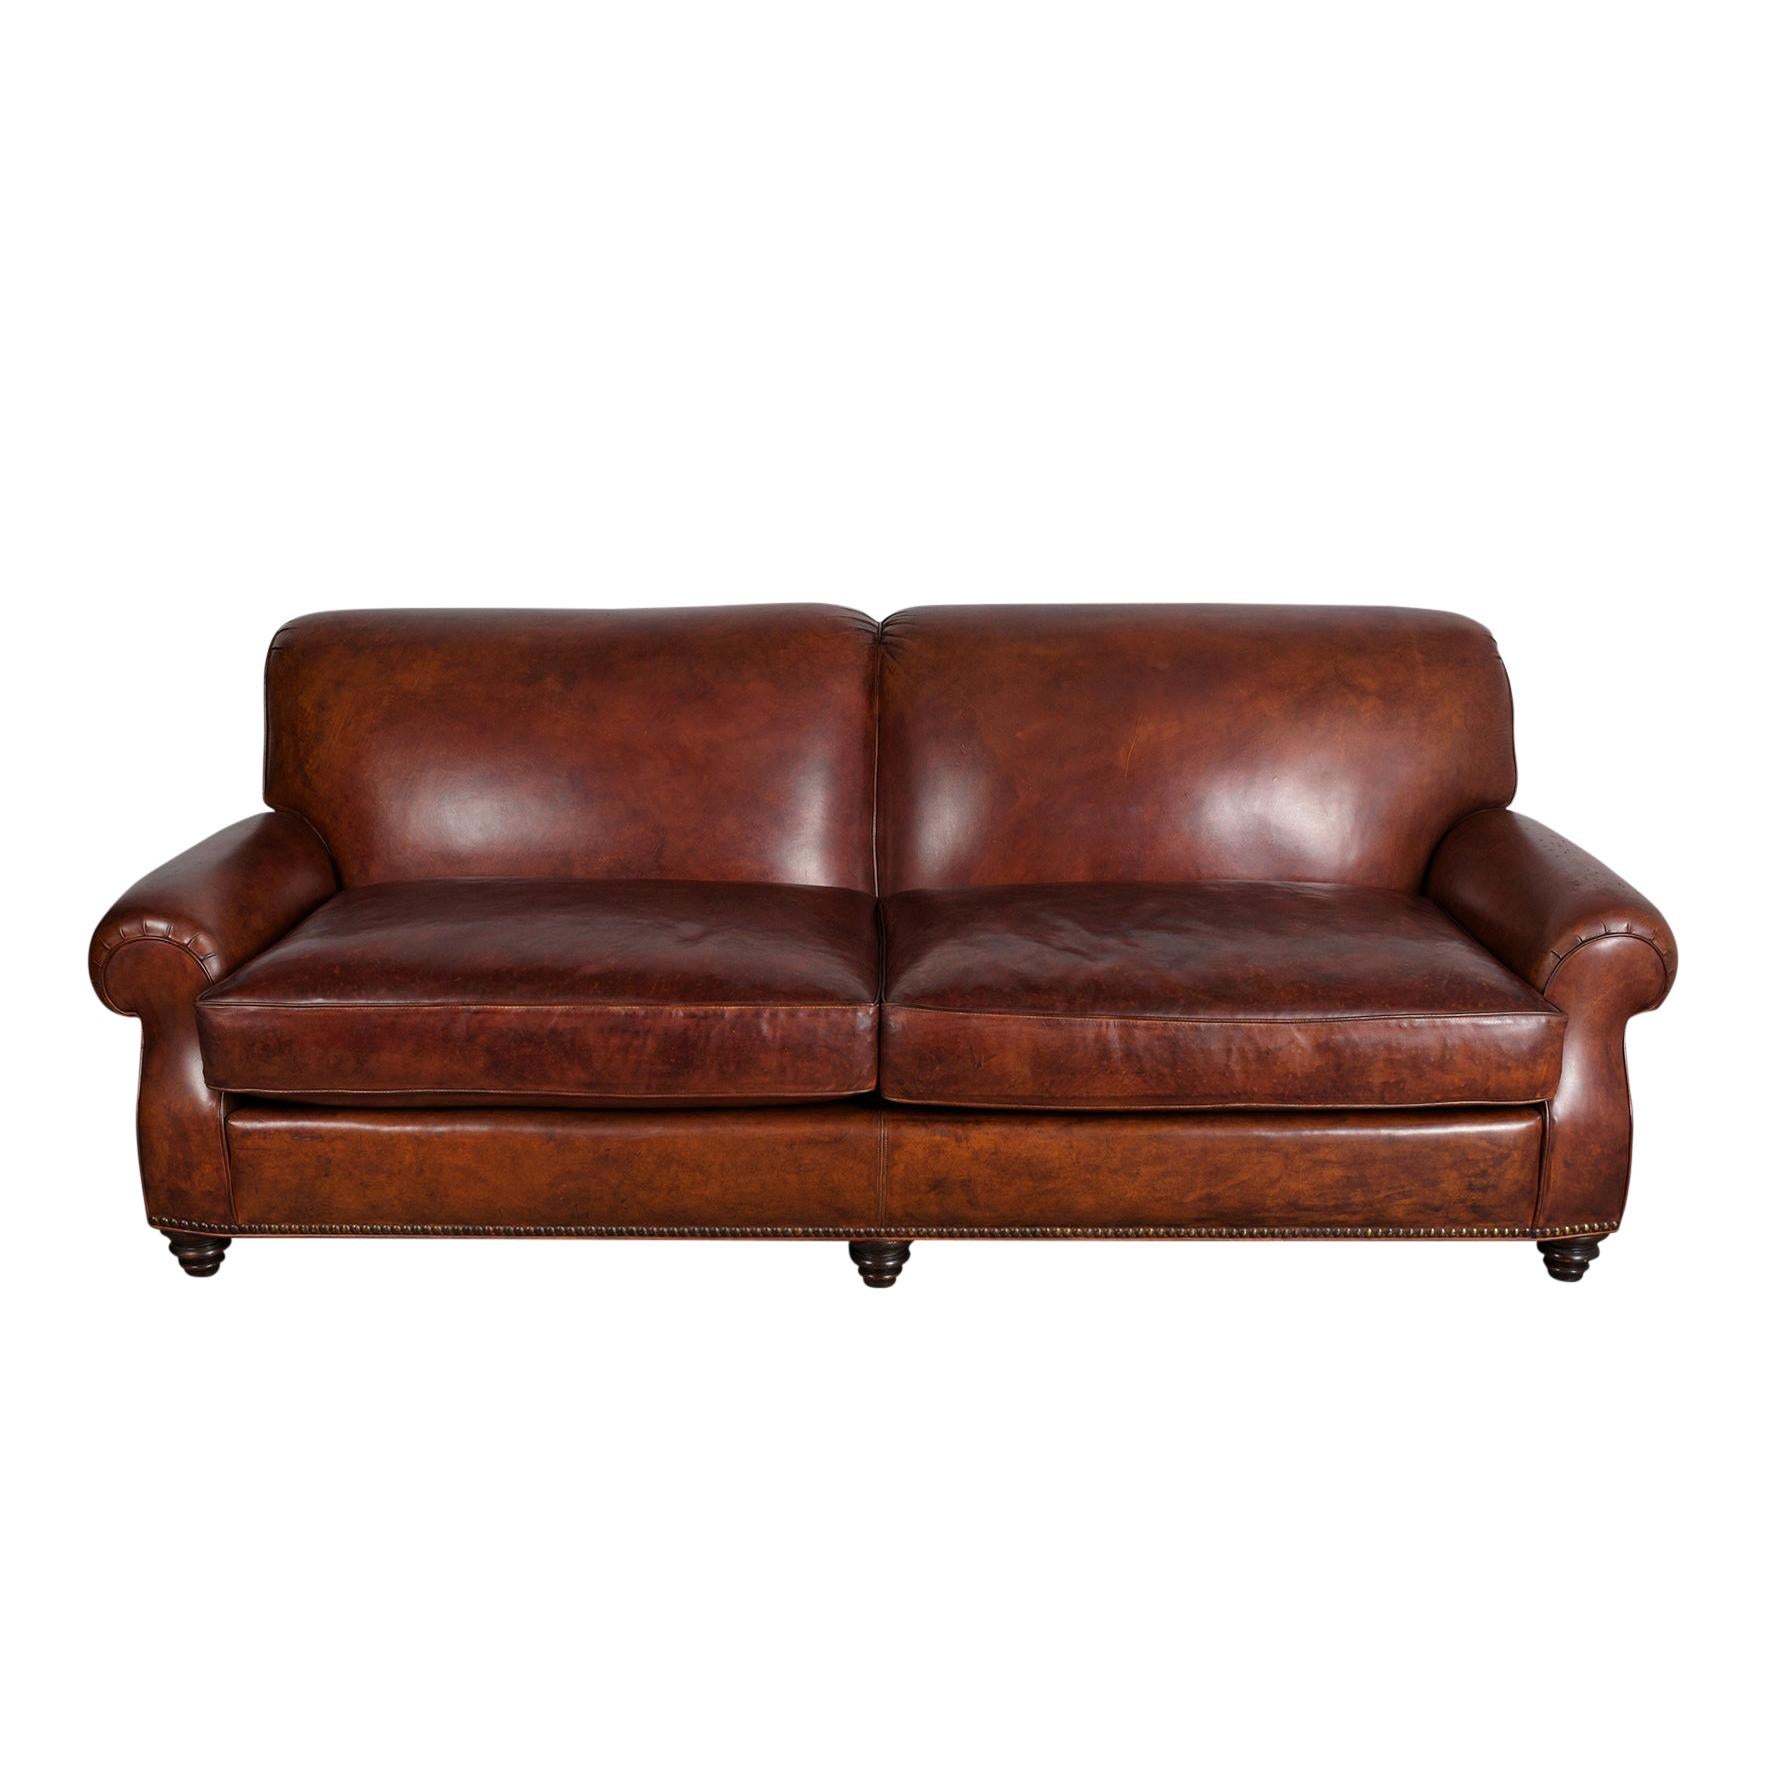 This vintage leather sofa is in great condition and is upholstered in its original rich brown color leather in great condition and has a beautiful patina finish. This sofa also features round armrests, two large seat cushions with single piping